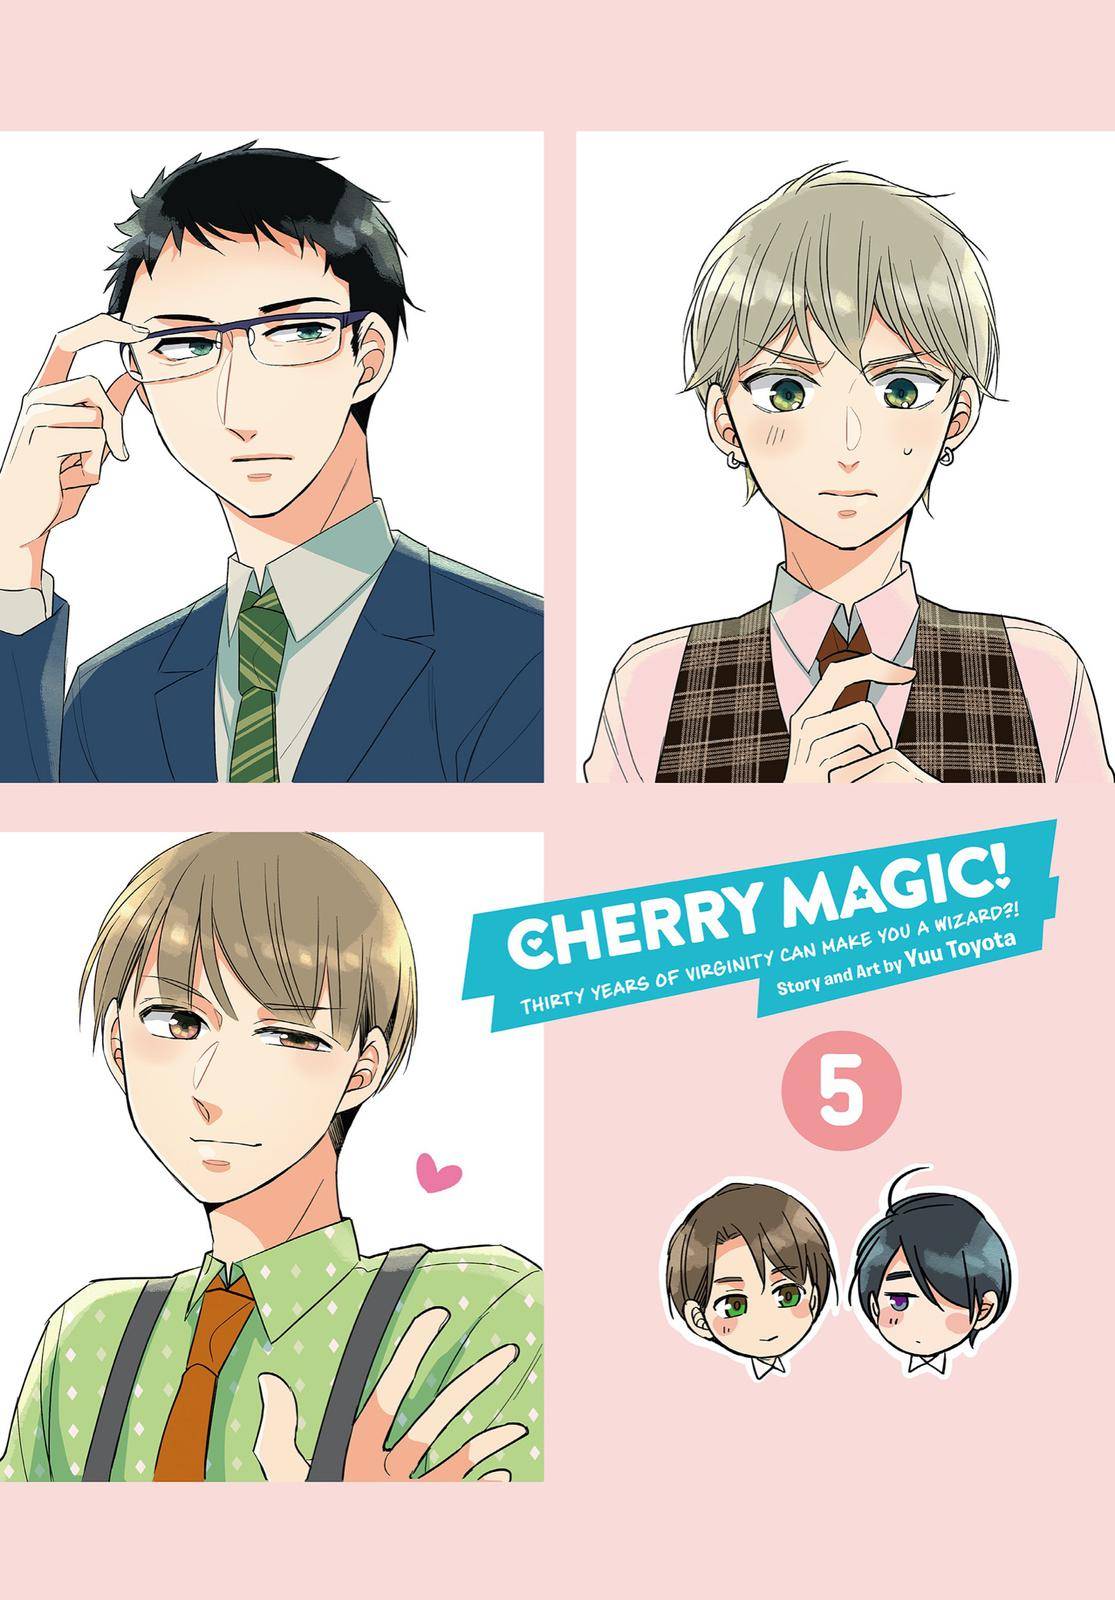 Cherry Magic! Thirty Years Of Virginity Can Make You A Wizard?! - chapter 24 - #2